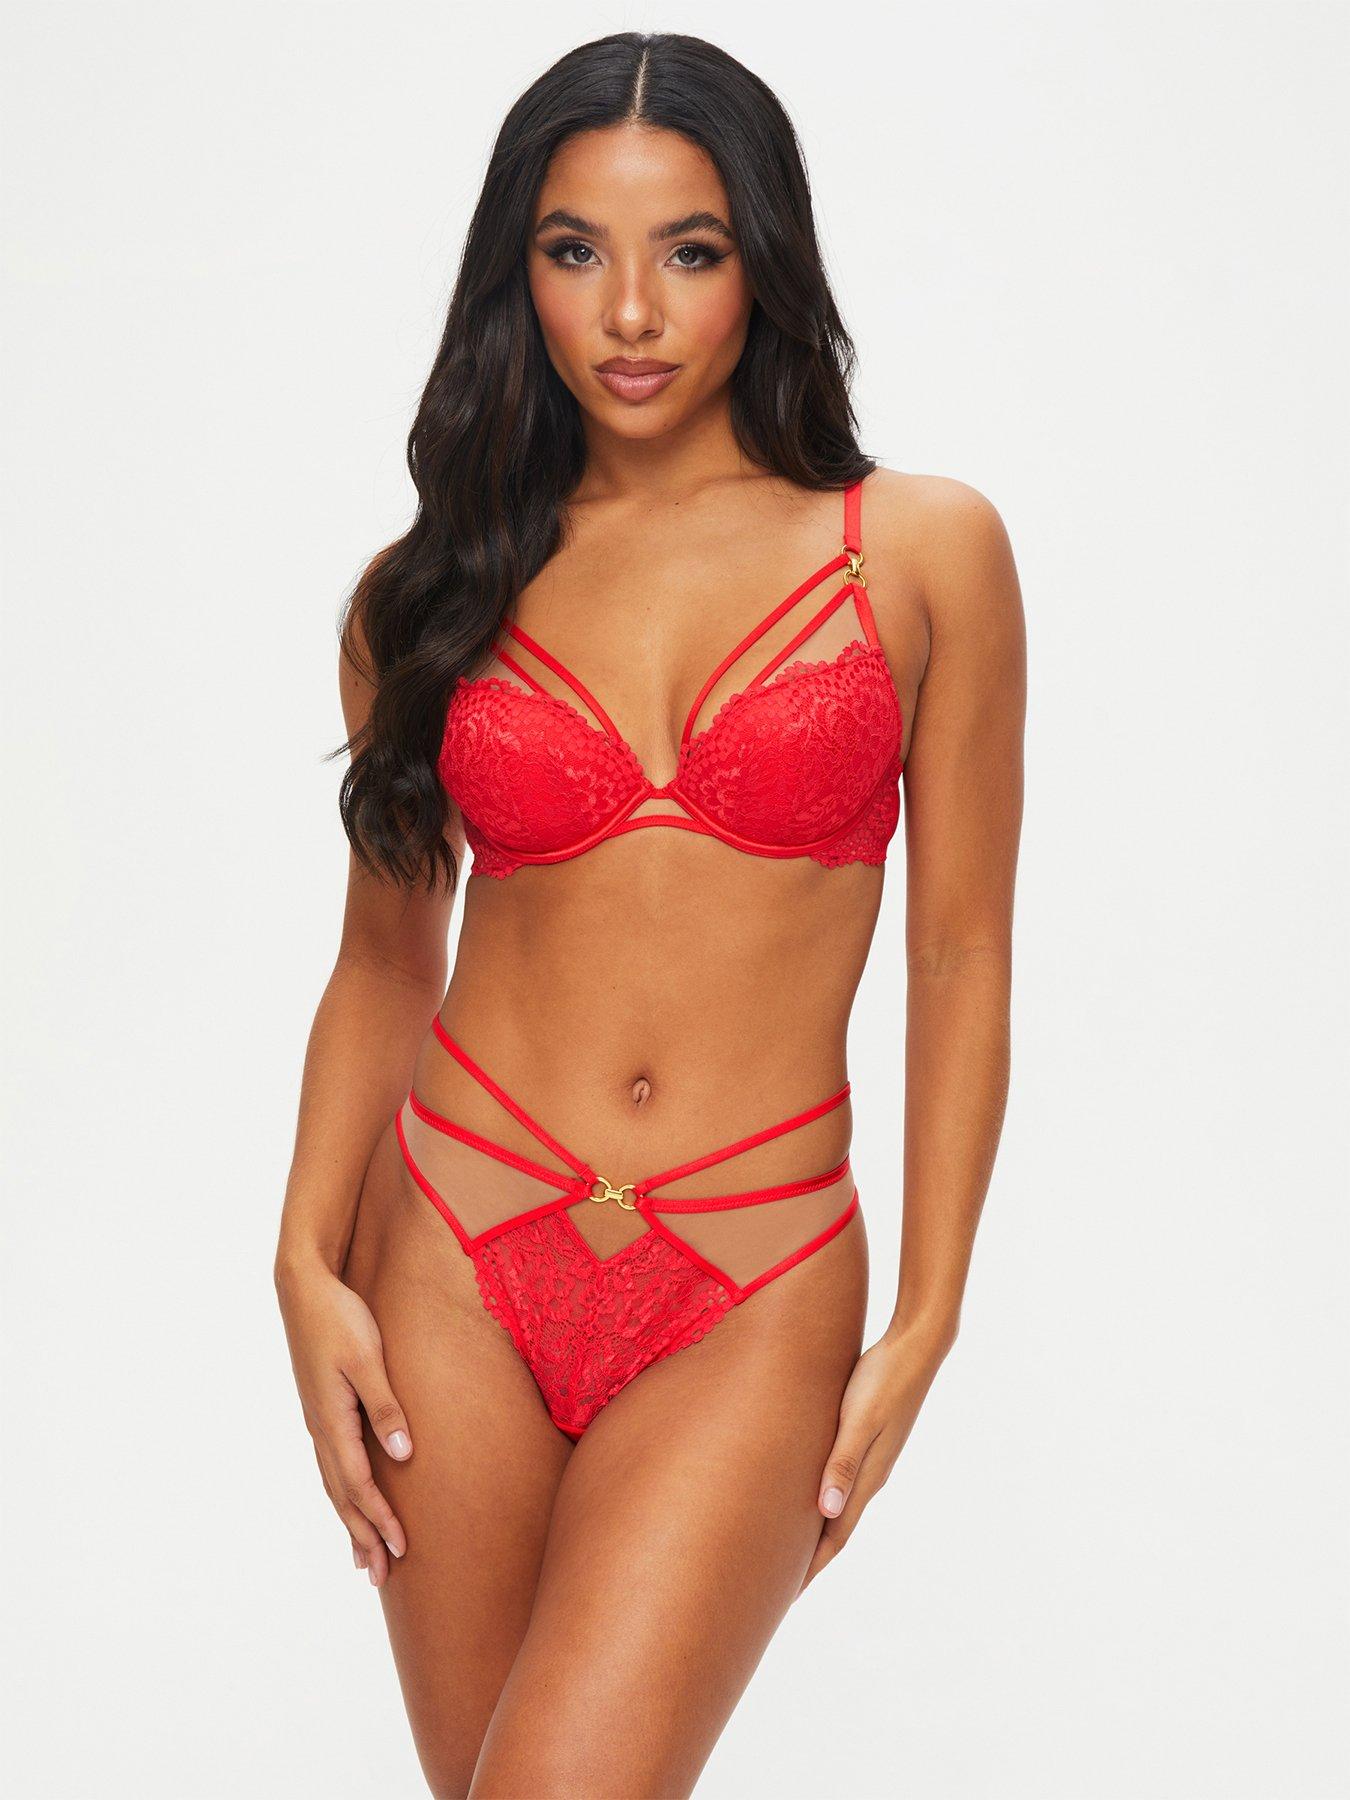 Sweetheart Collection, Ribbon Tie Underwire Bra and Split Crotch Boy Short  Set